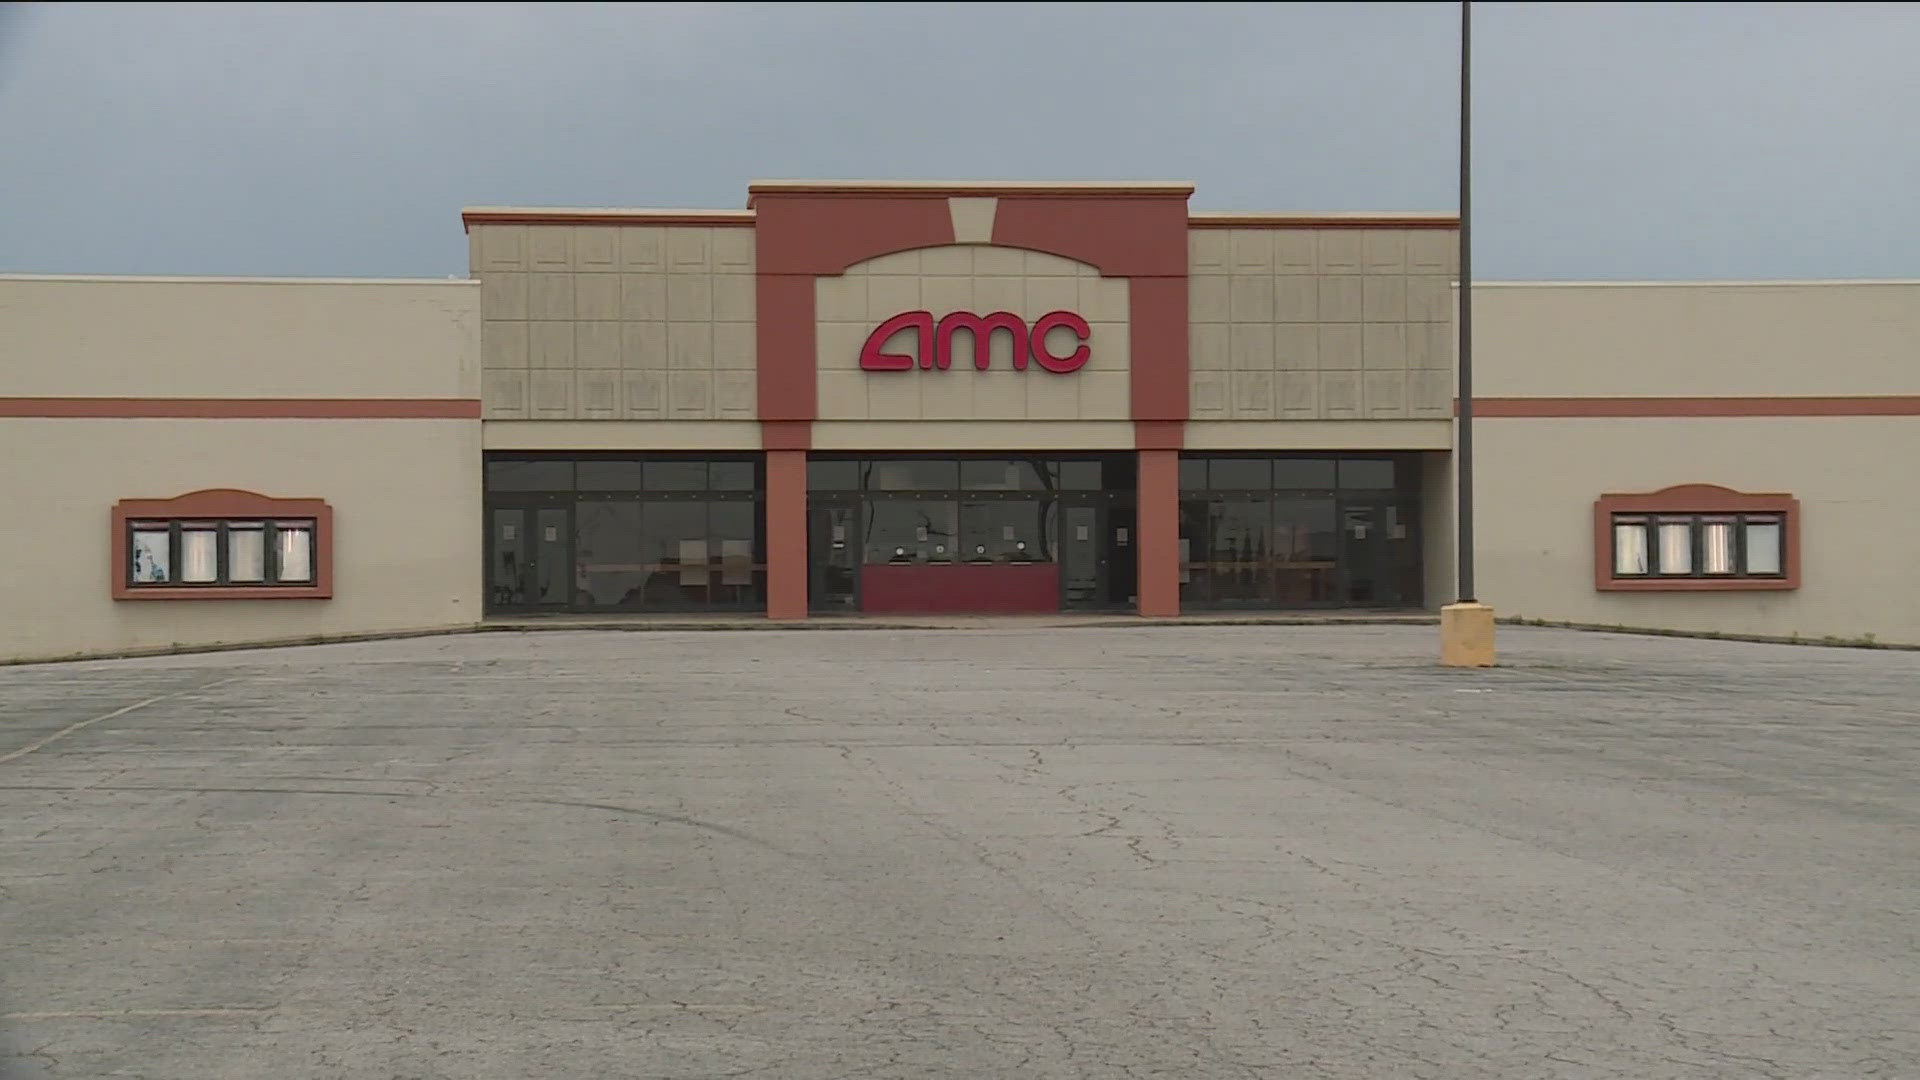 The AMC CLASSIC Theatre on Towson Avenue in Fort Smith has closed its doors.